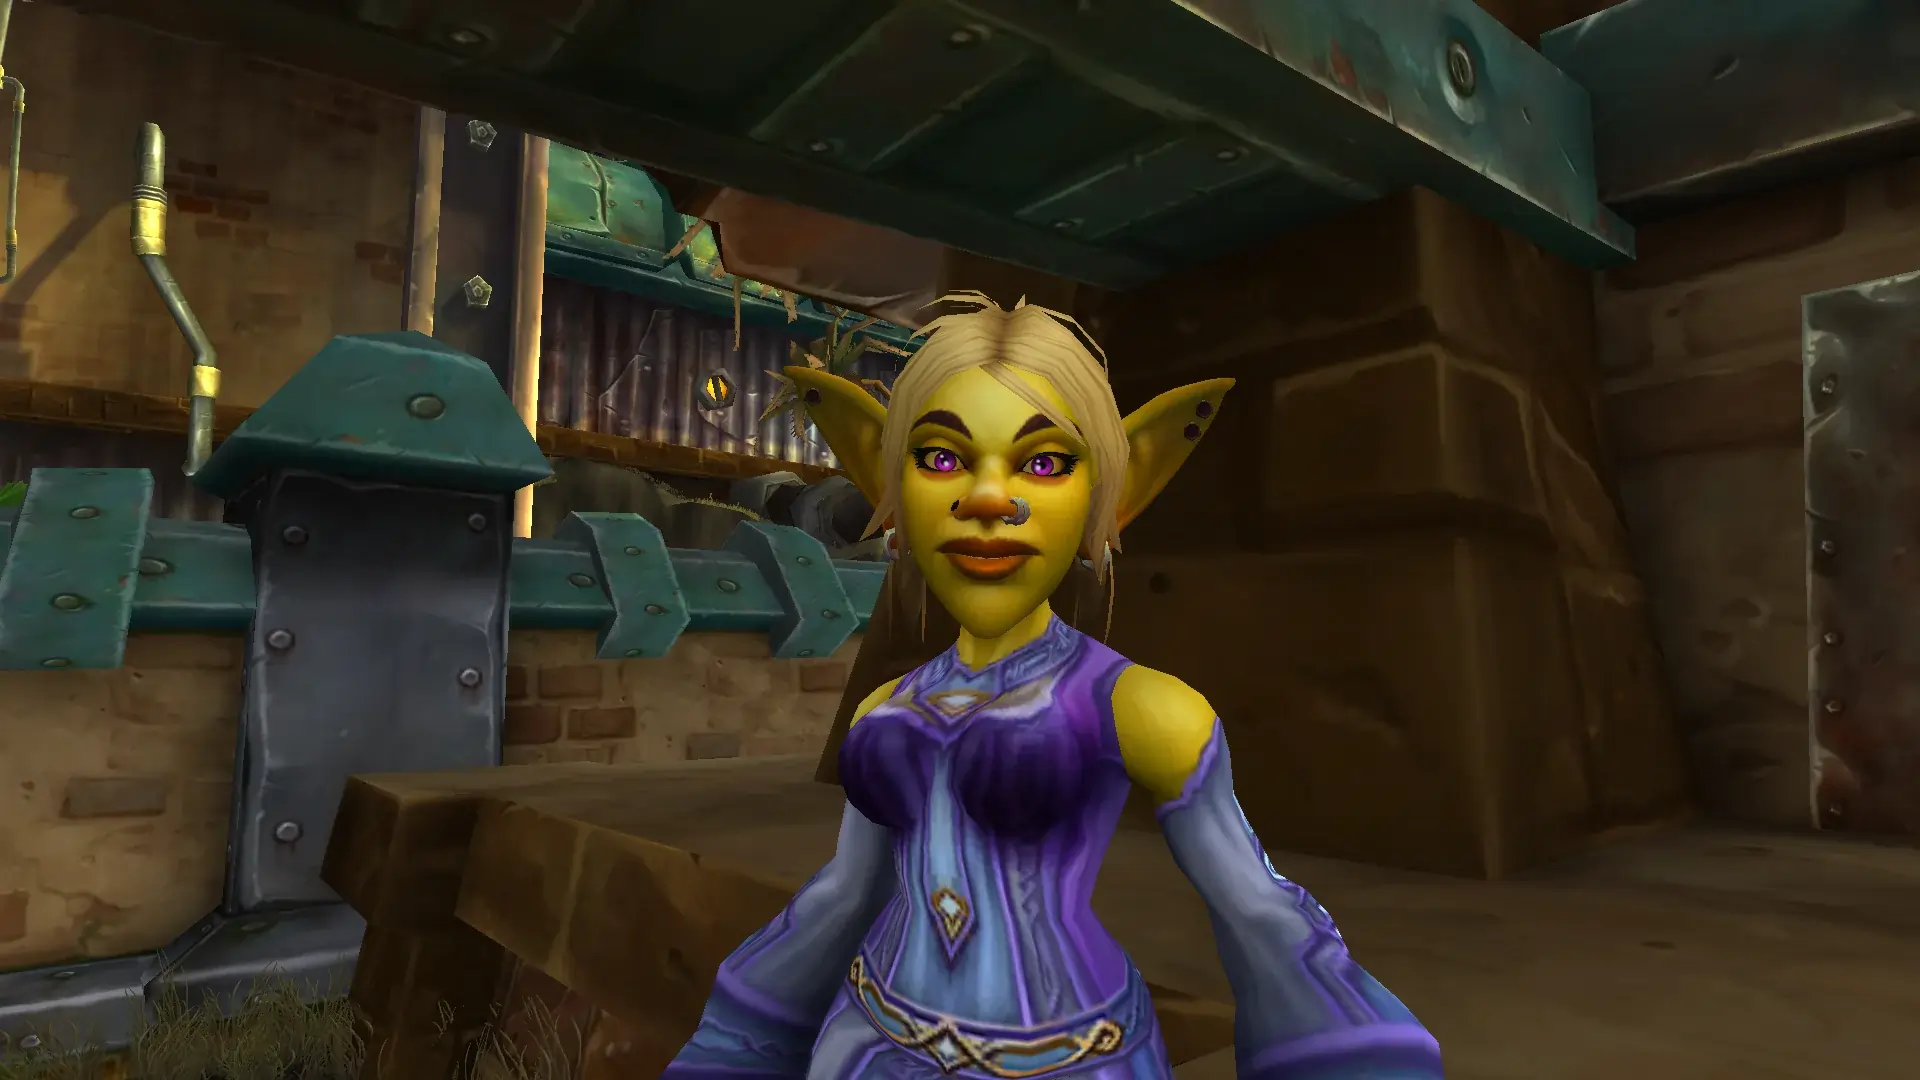 Image of World of warcraft Goblin Race